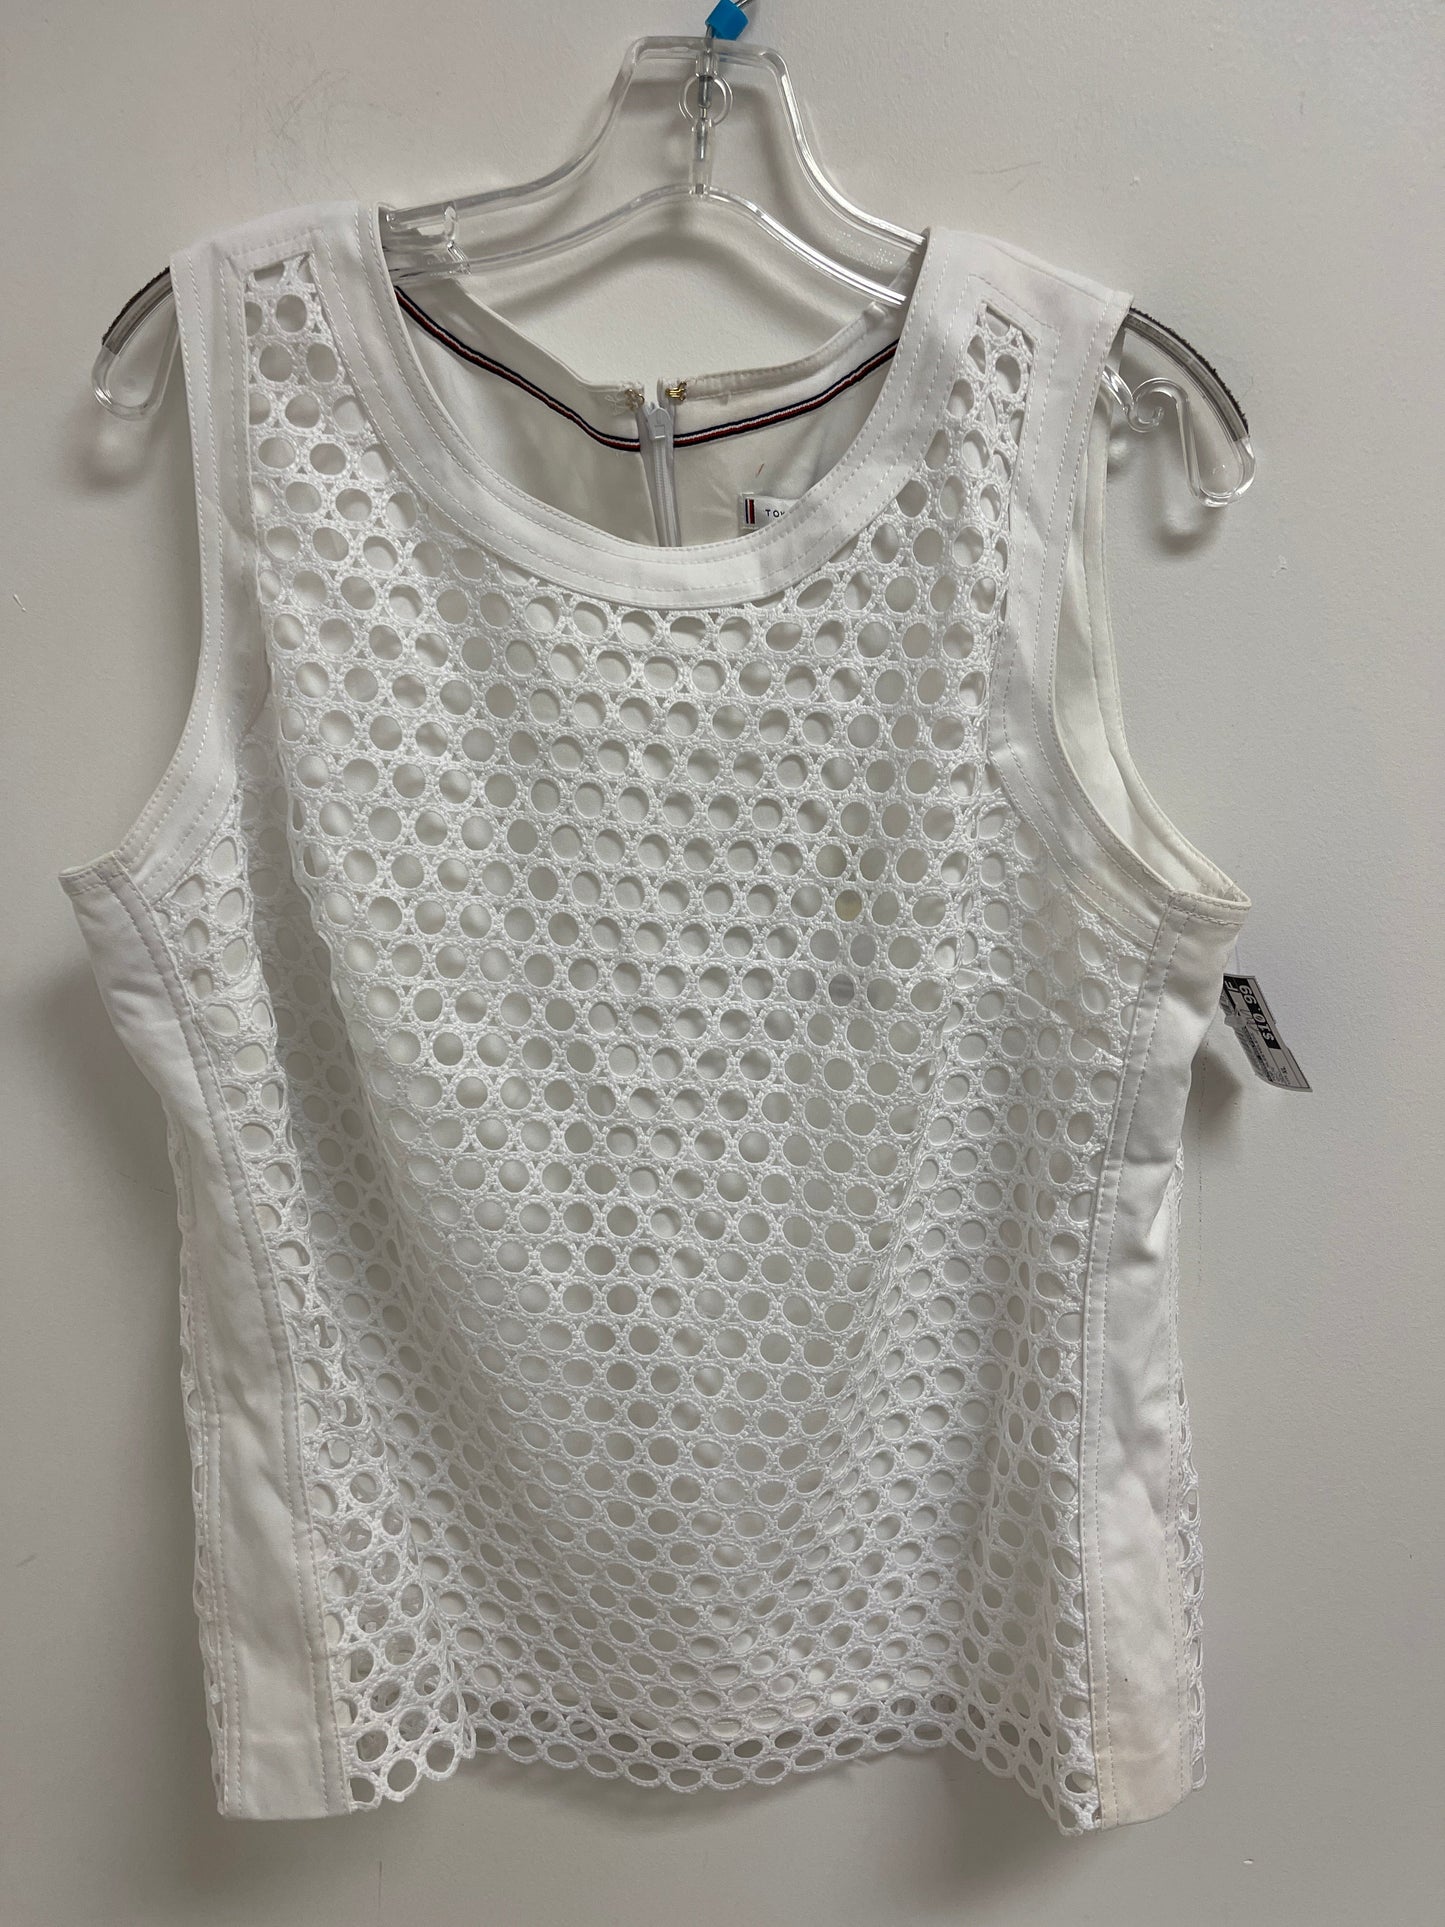 White Top Sleeveless Tommy Hilfiger, Size Xl